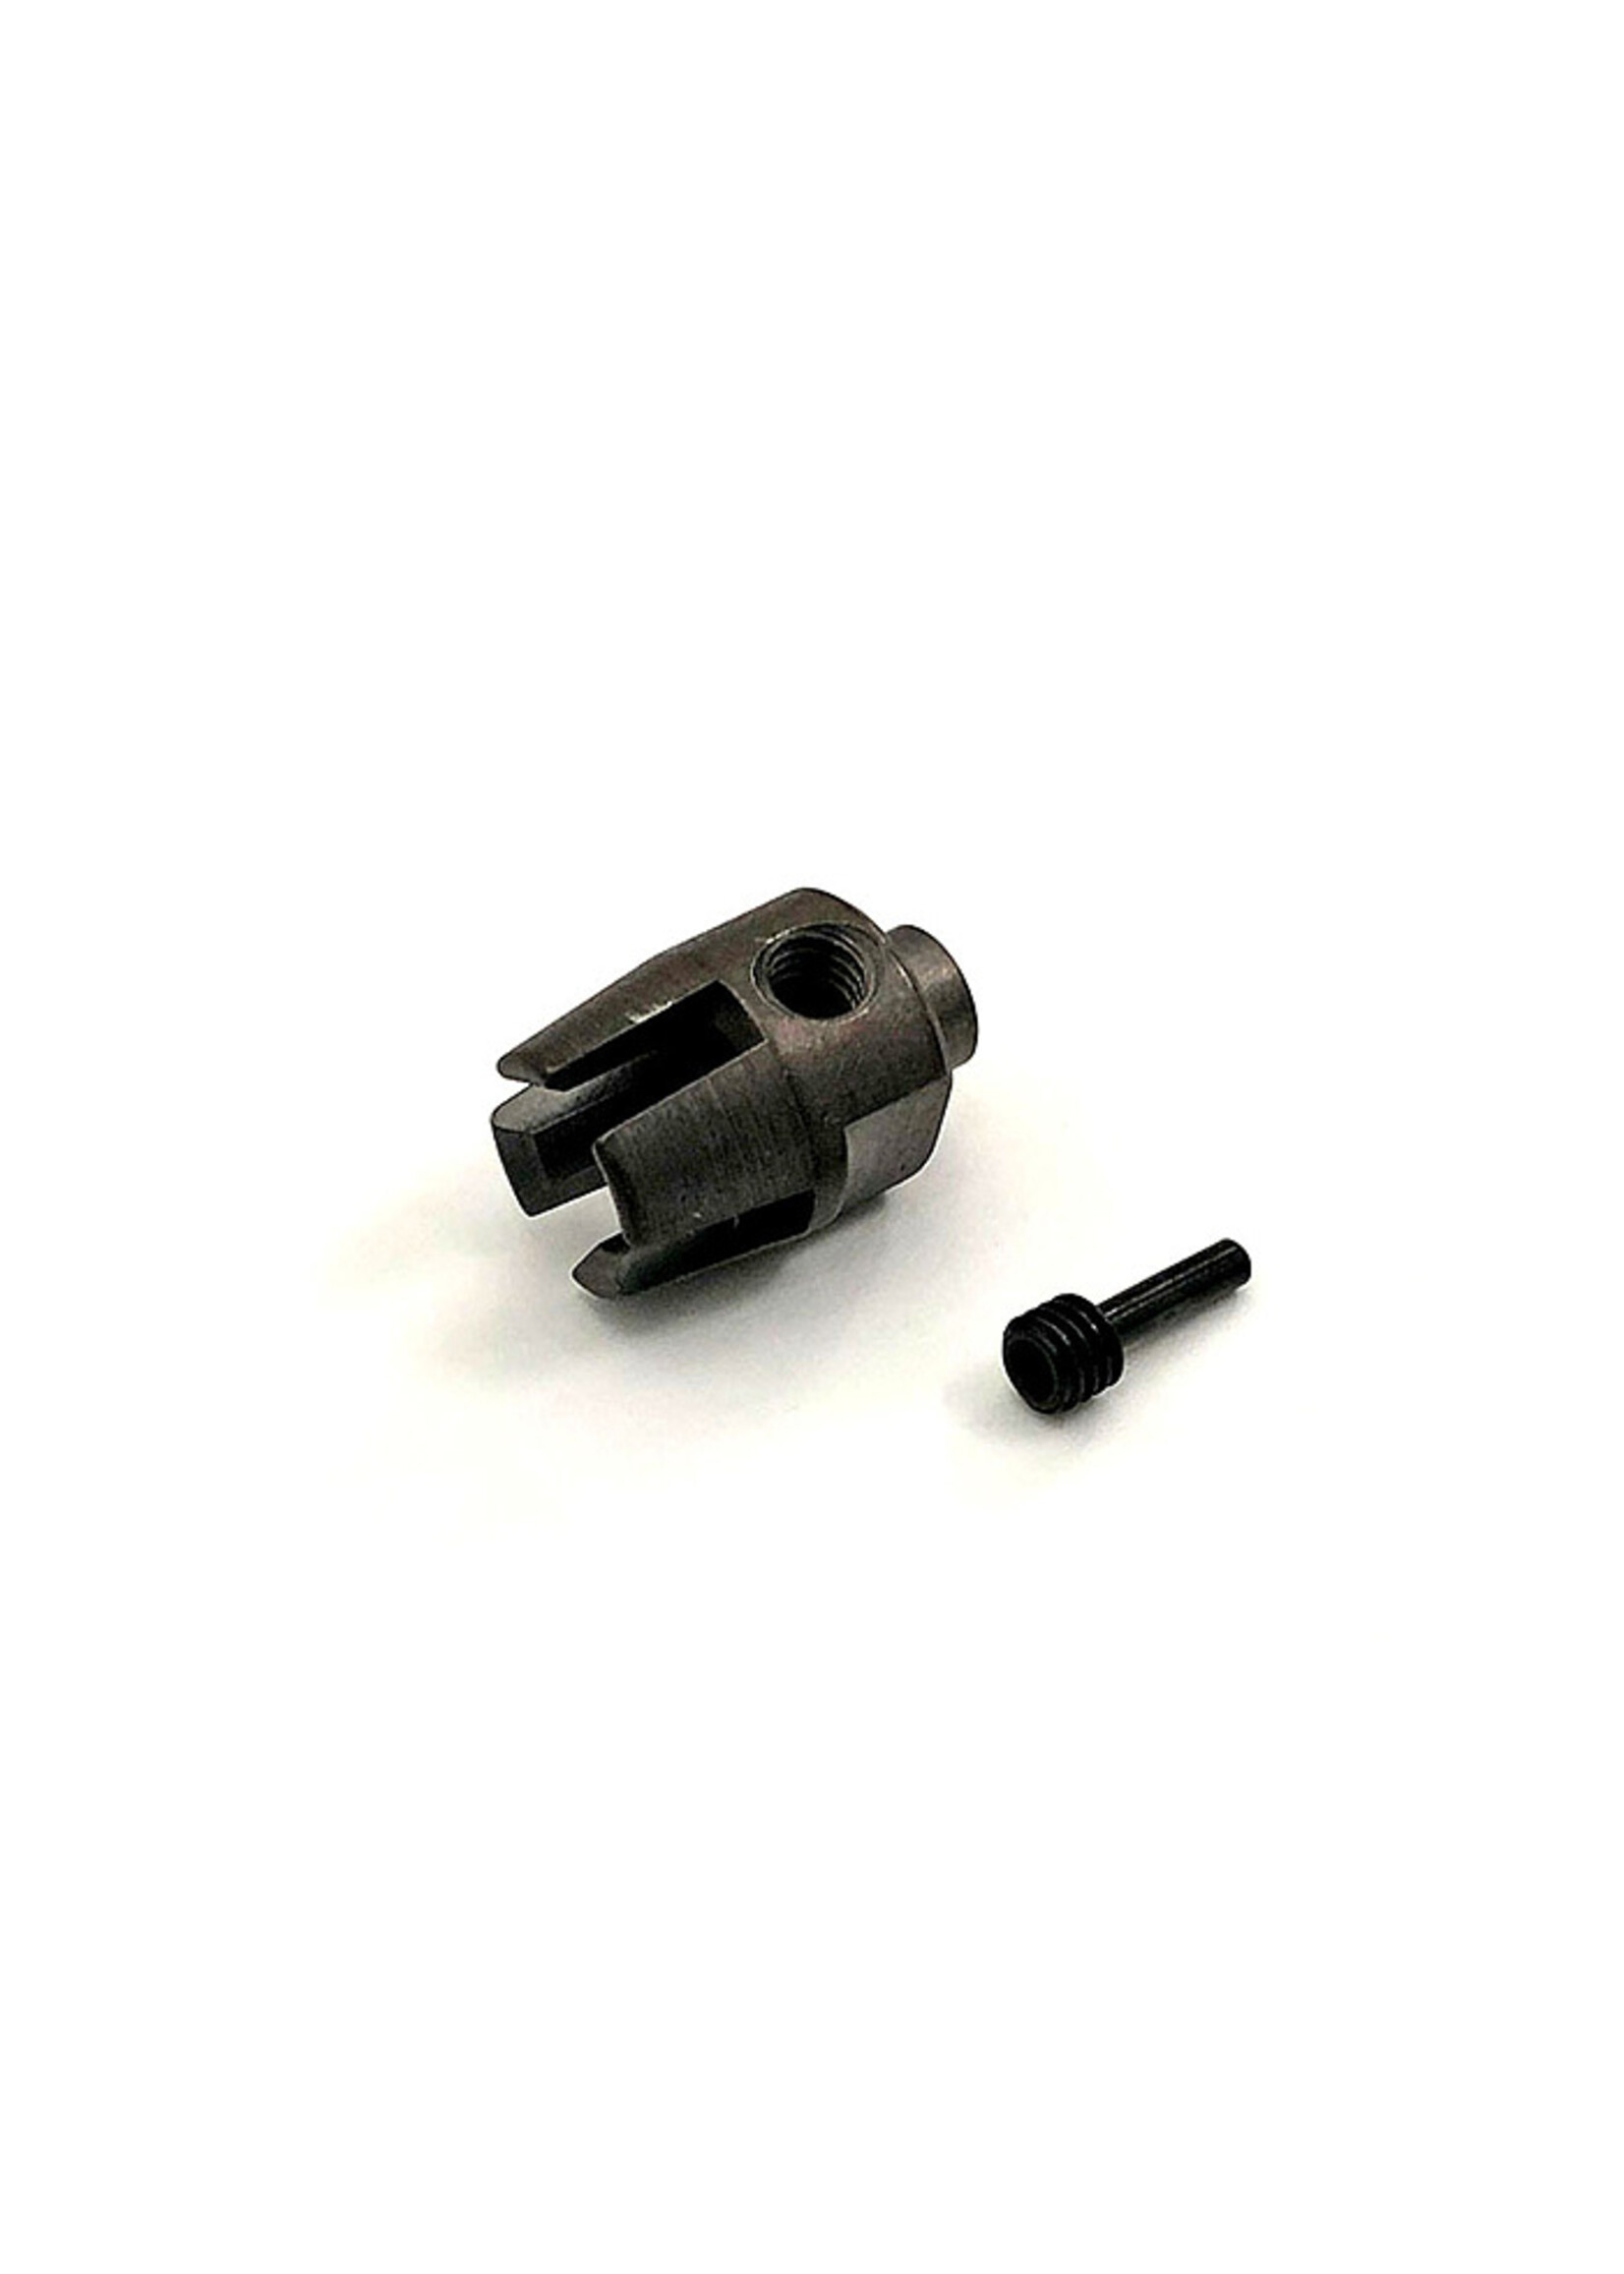 Kyosho KYOFAW212 Kyosho HD Center Shaft Cup R, for Fazer MK2 Chassis (FZ02)